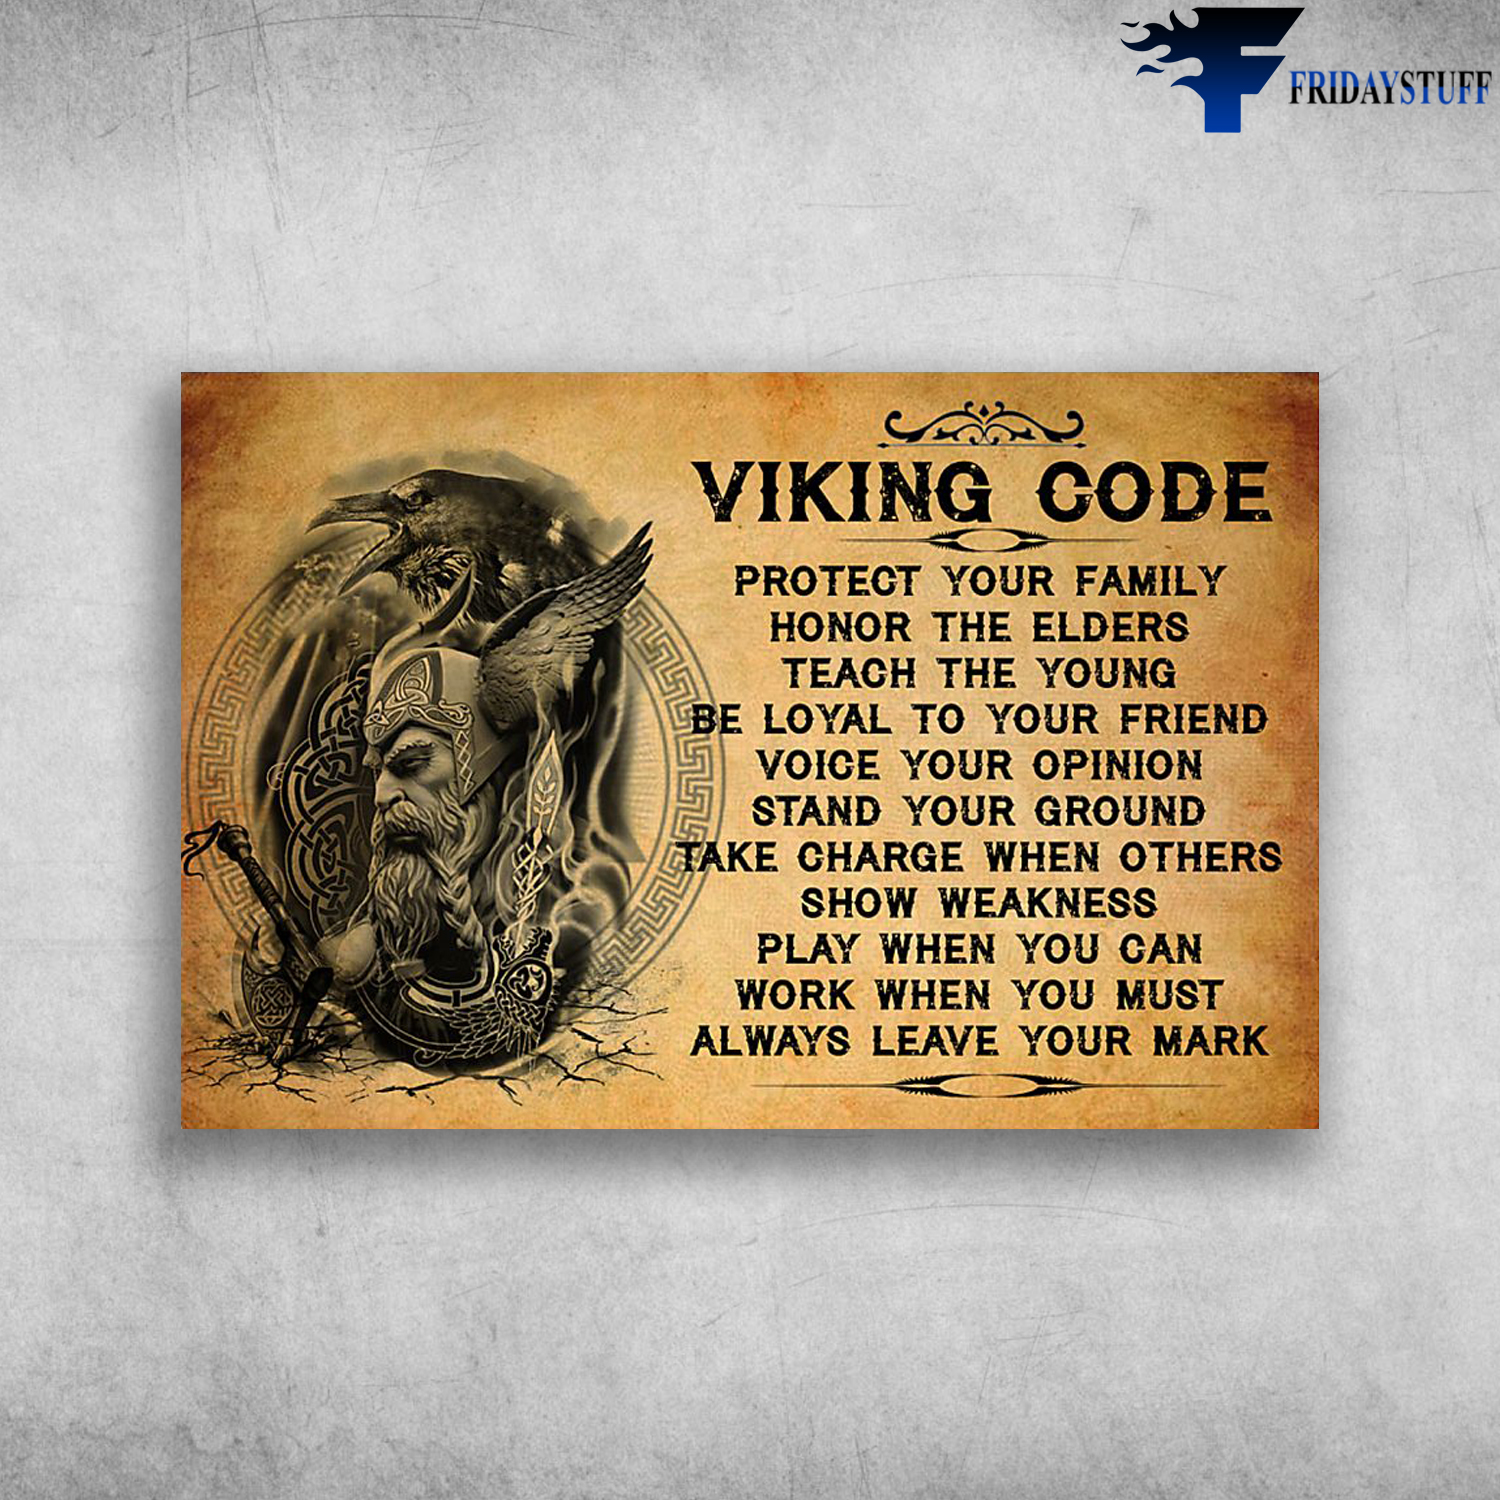 The Vikings With The Ax And Blackbird Viking Code Protect Your Family